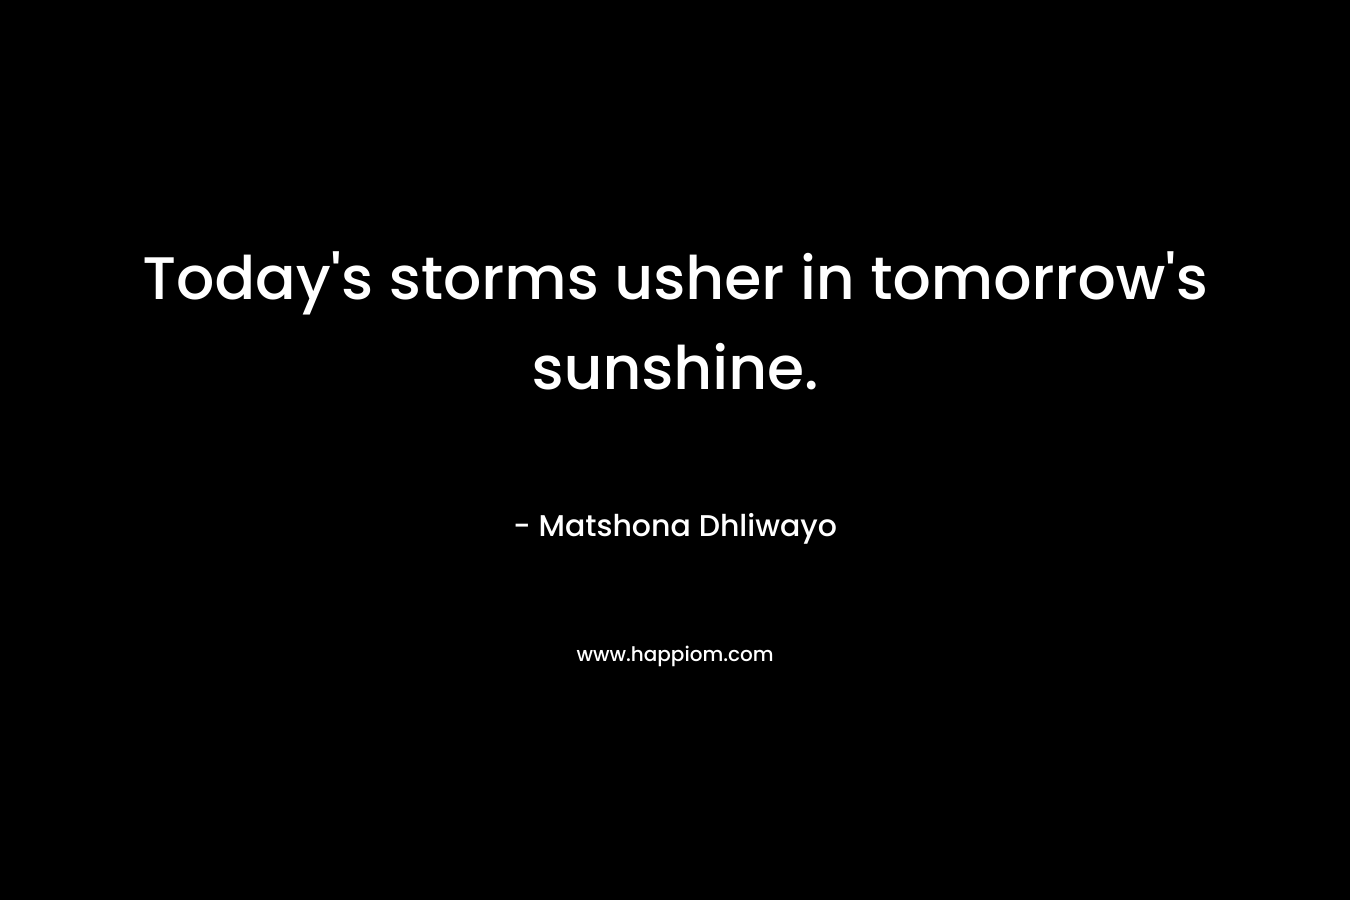 Today's storms usher in tomorrow's sunshine.